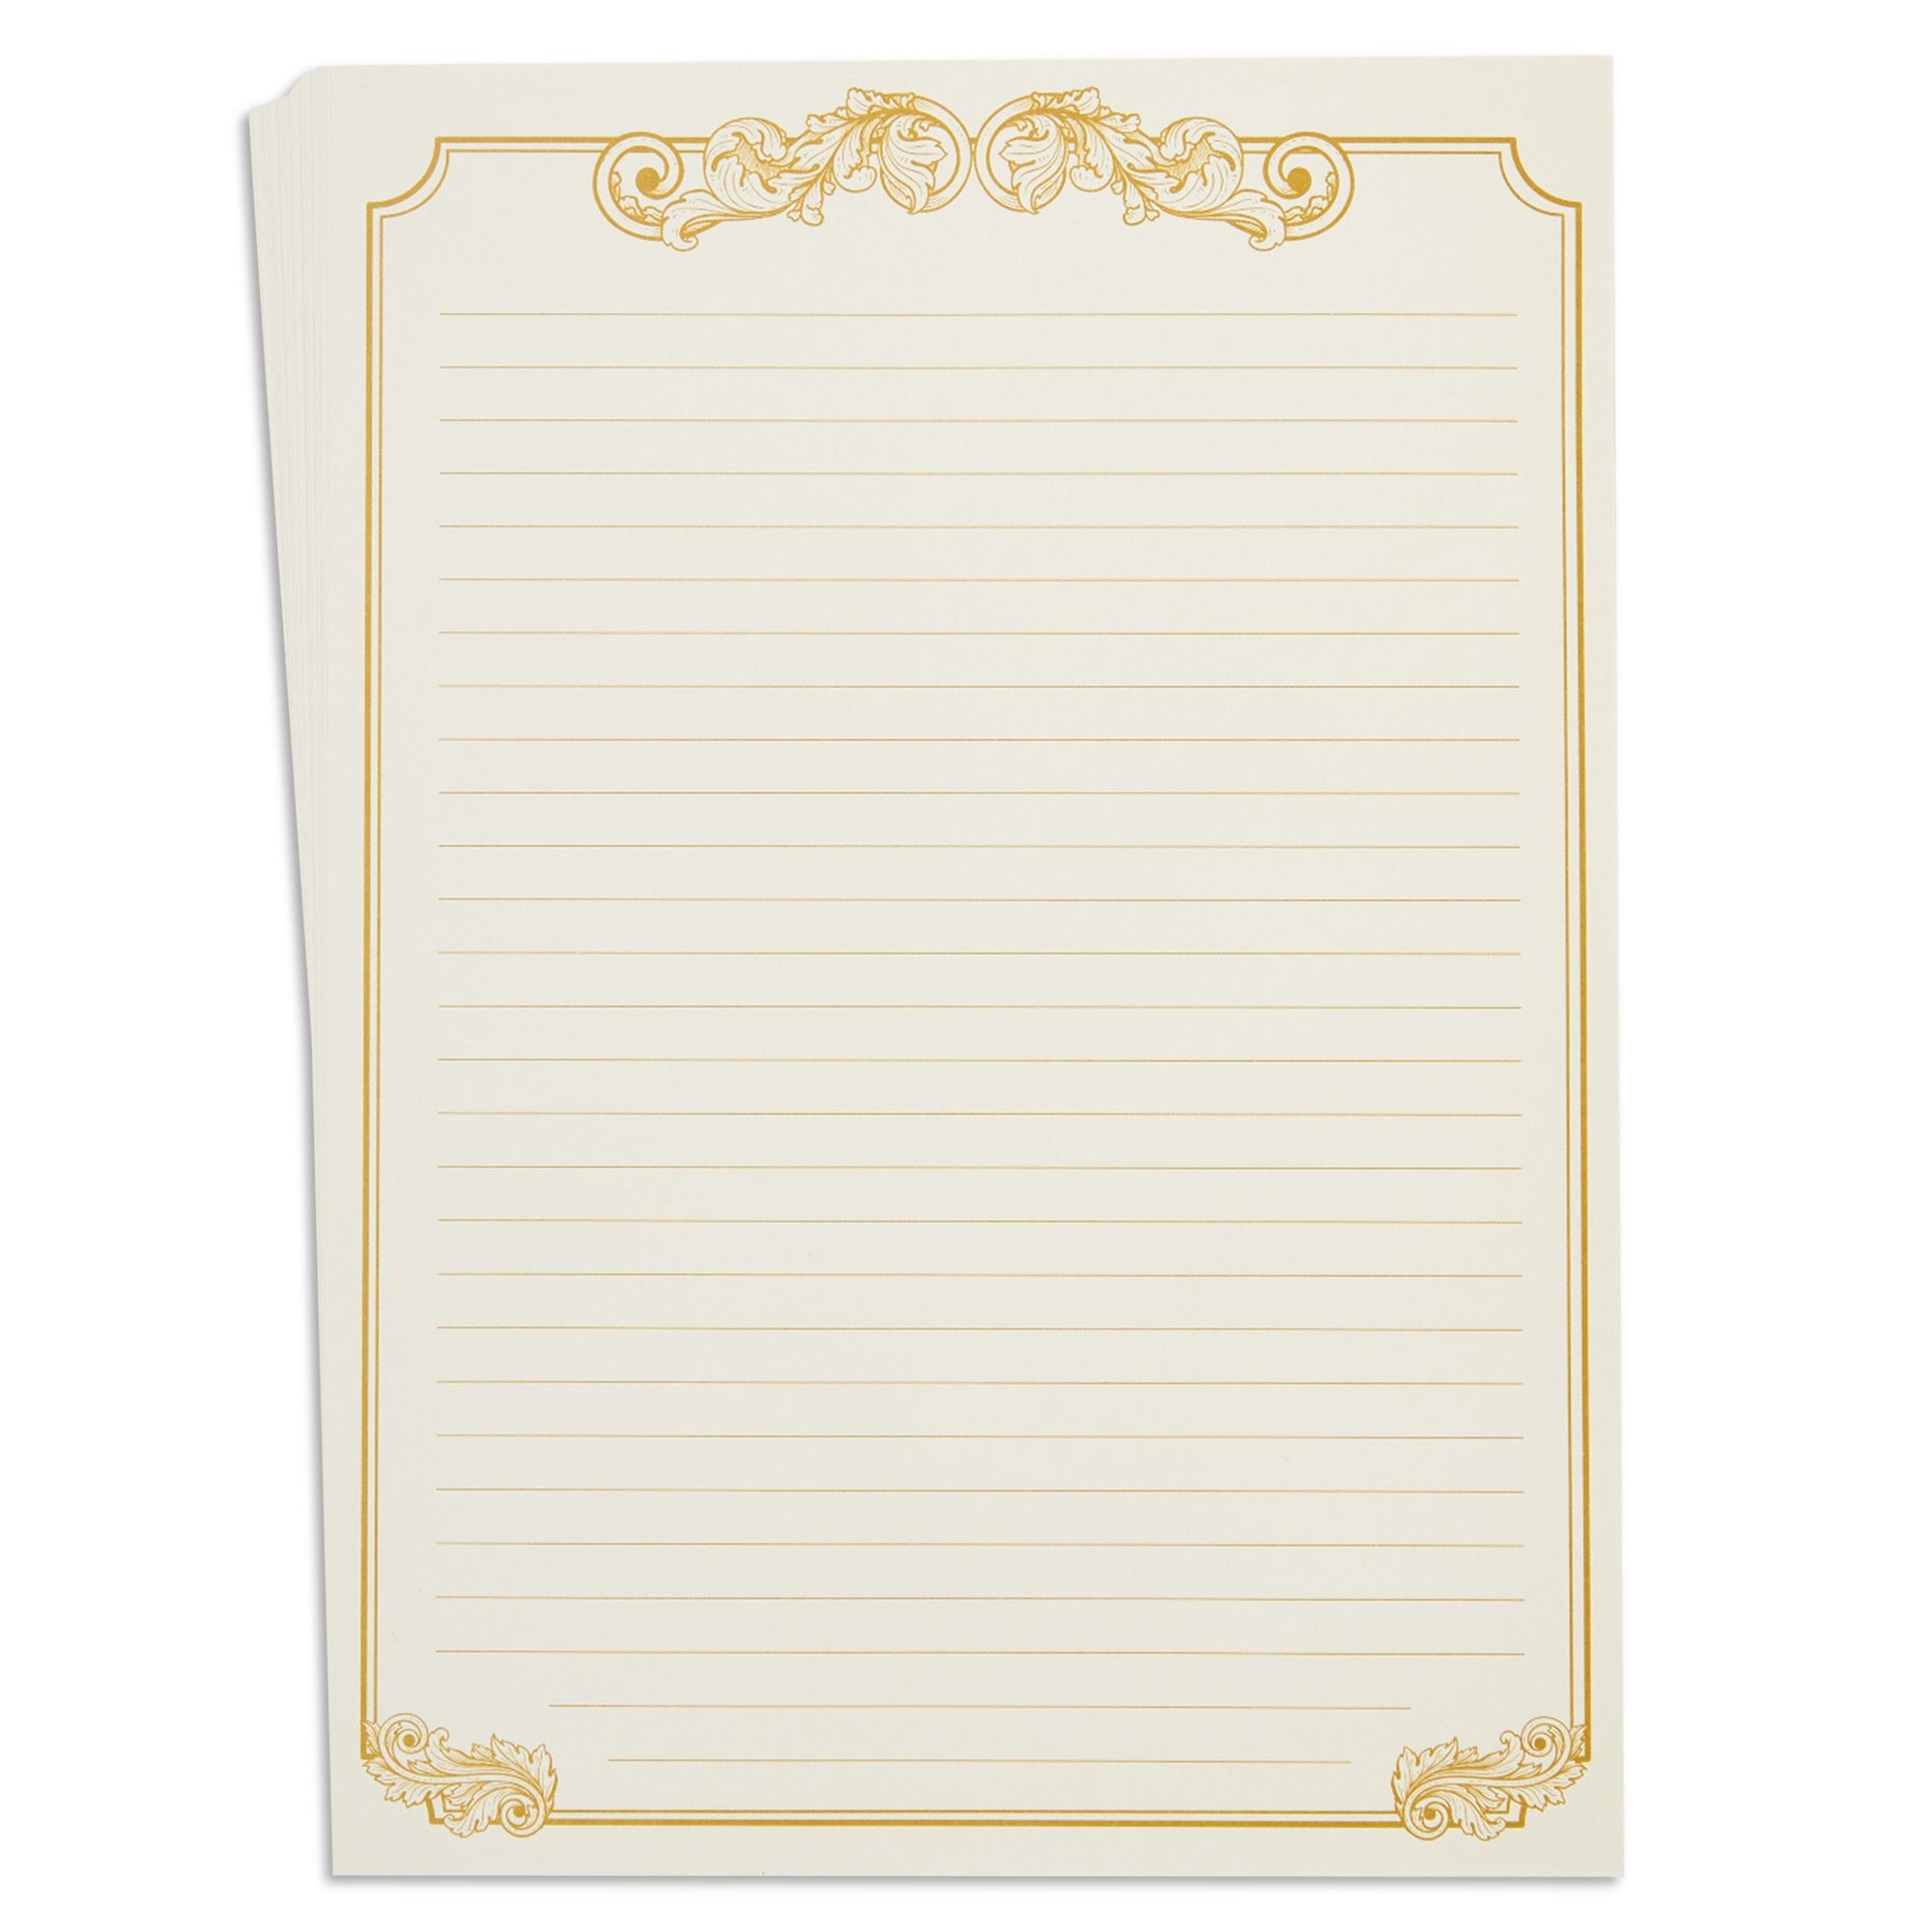 90 Pieces Stationery Set (60 Vintage-Style Paper Sheets + 30  Envelopes),Gold Border Letter Writing Paper for Love Letter, Party  Invitations 